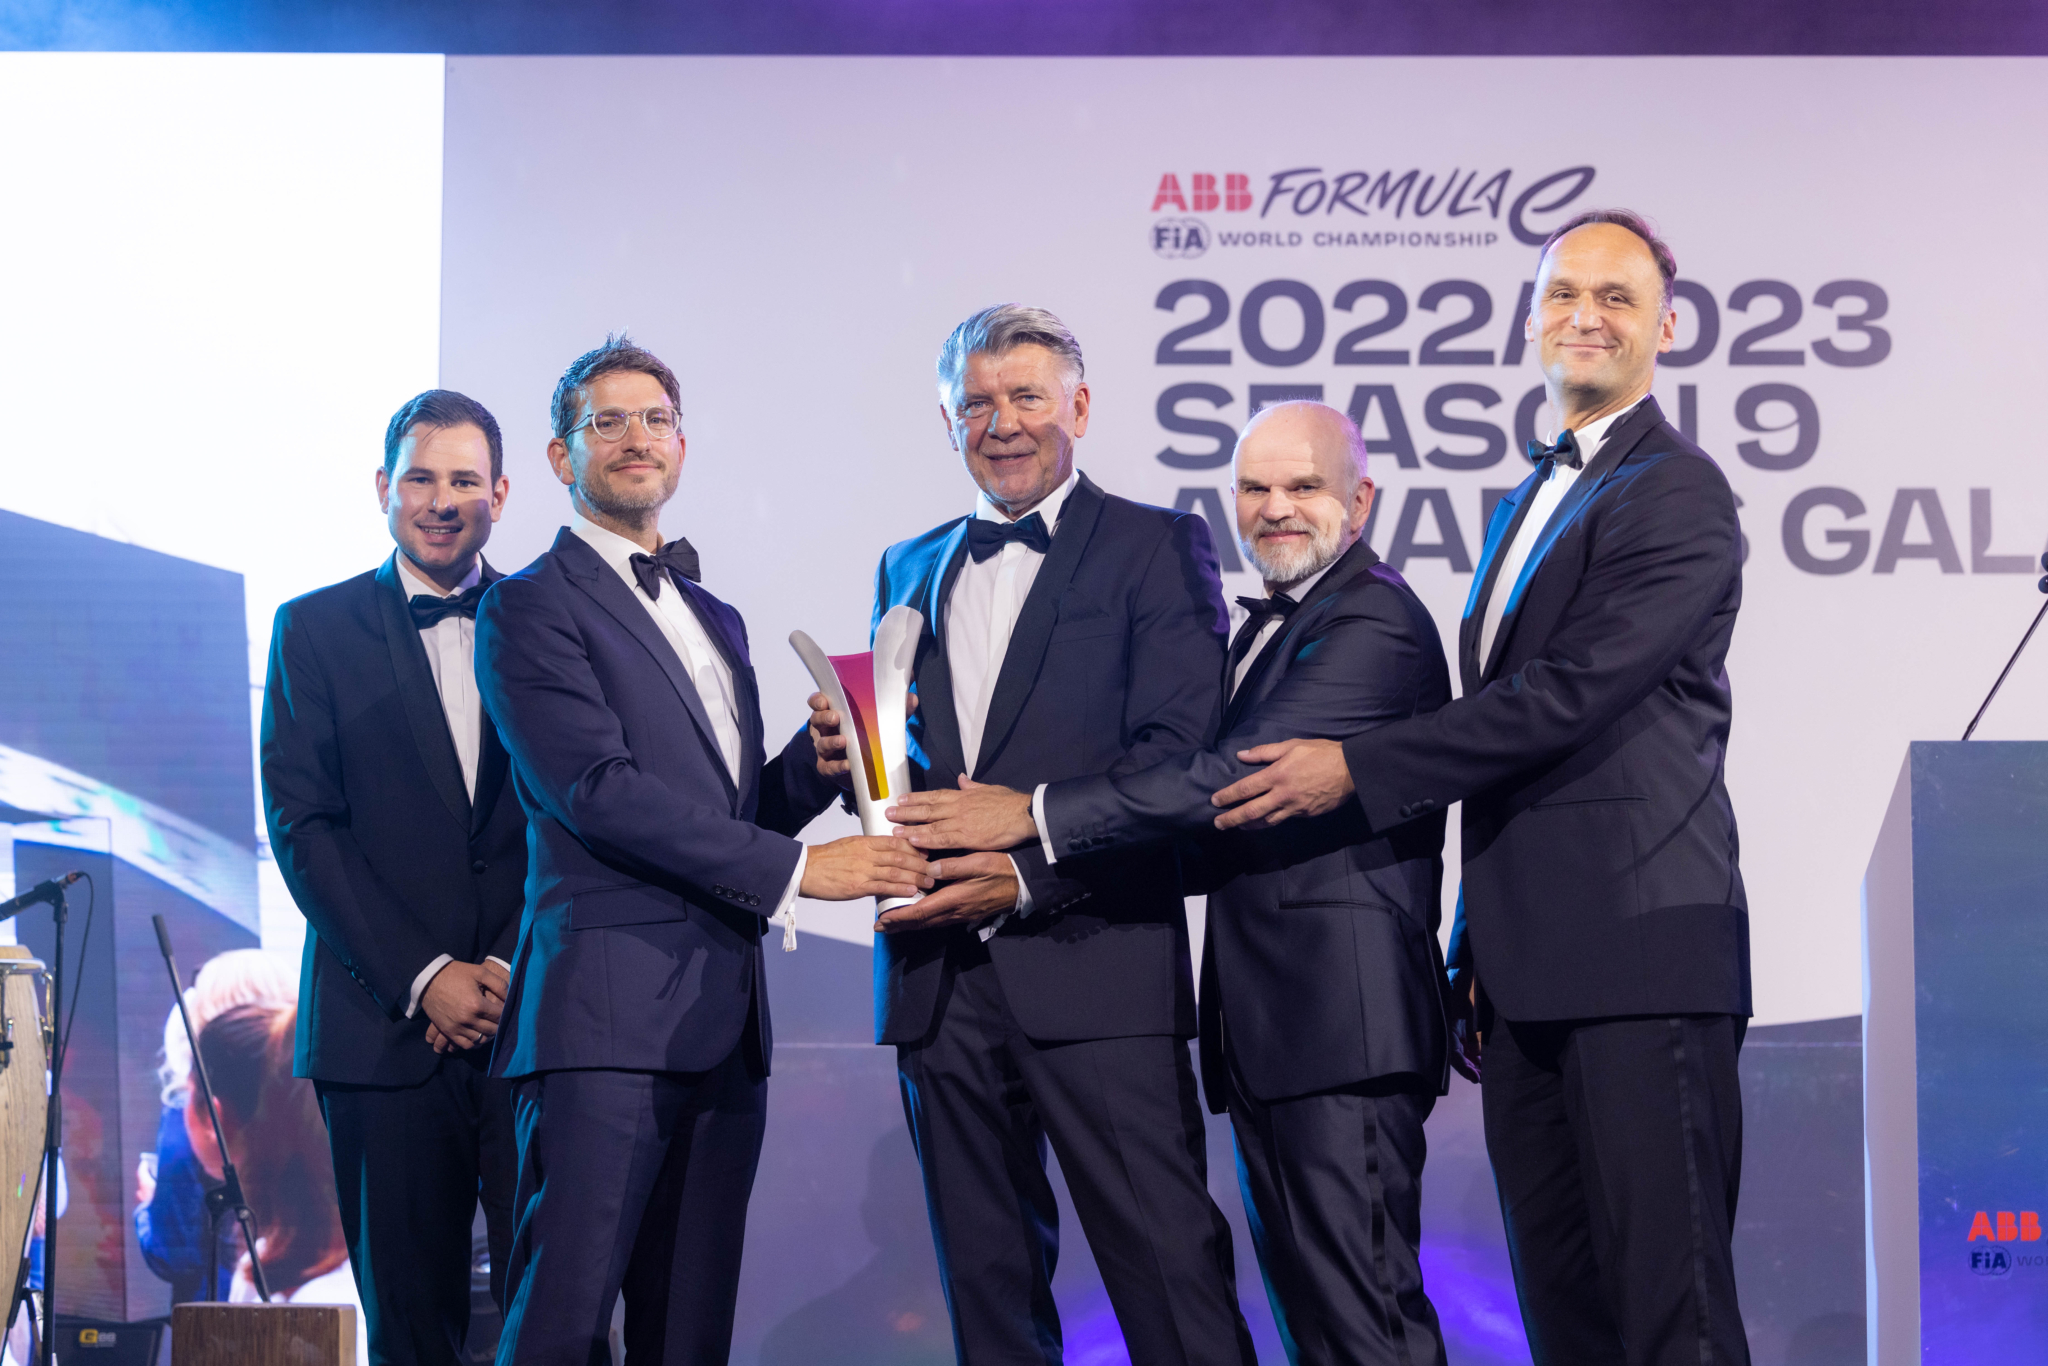 Hankook recognised with award for best fan experience in 2023 Formula E World Championship